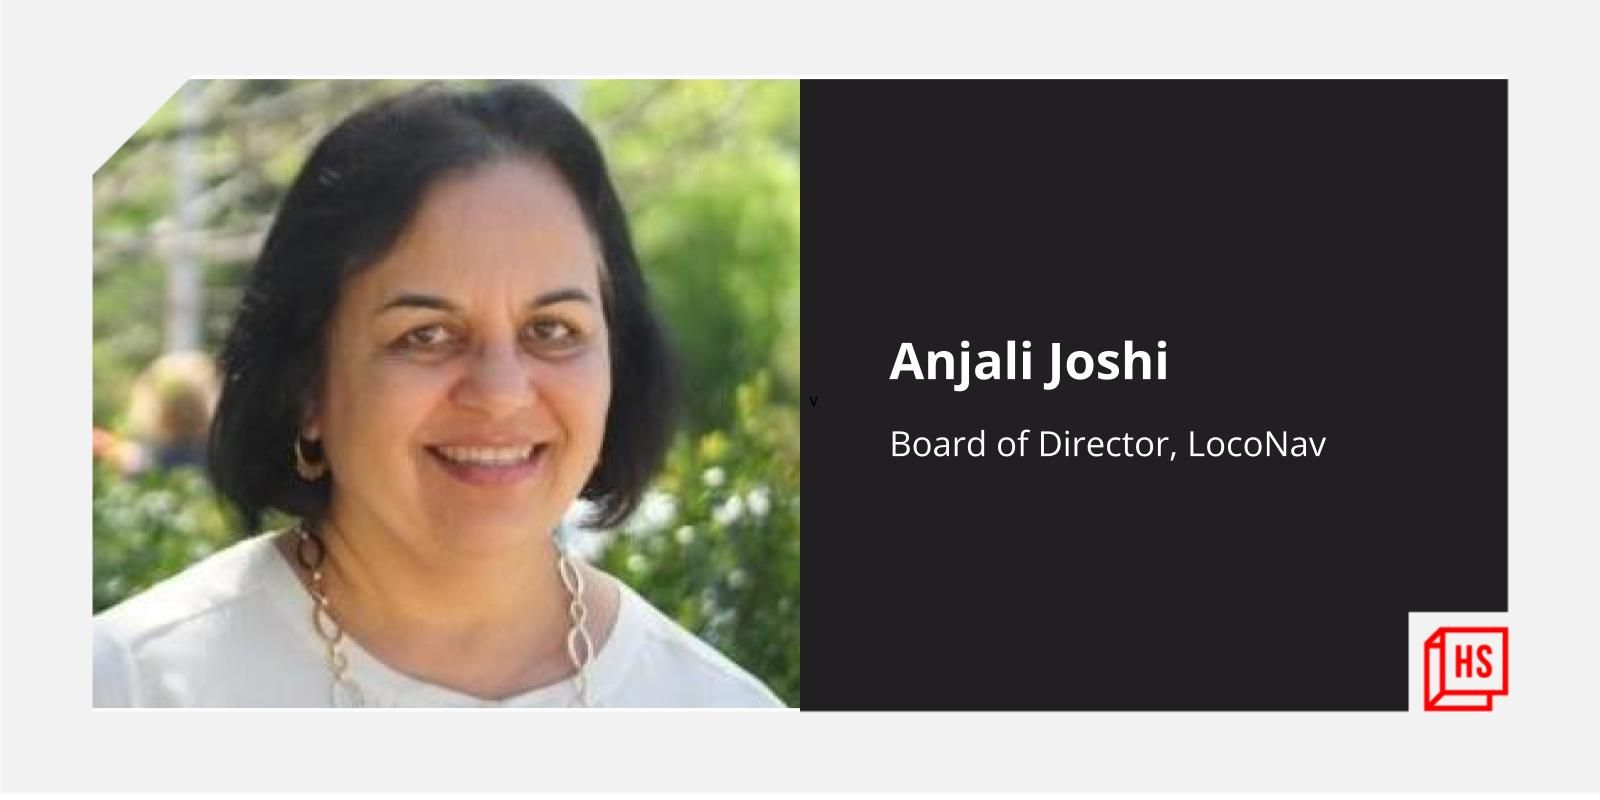 [Women in Tech] It's not about how far you fall, but how high you bounce back, says Anjali Joshi of LocoNav